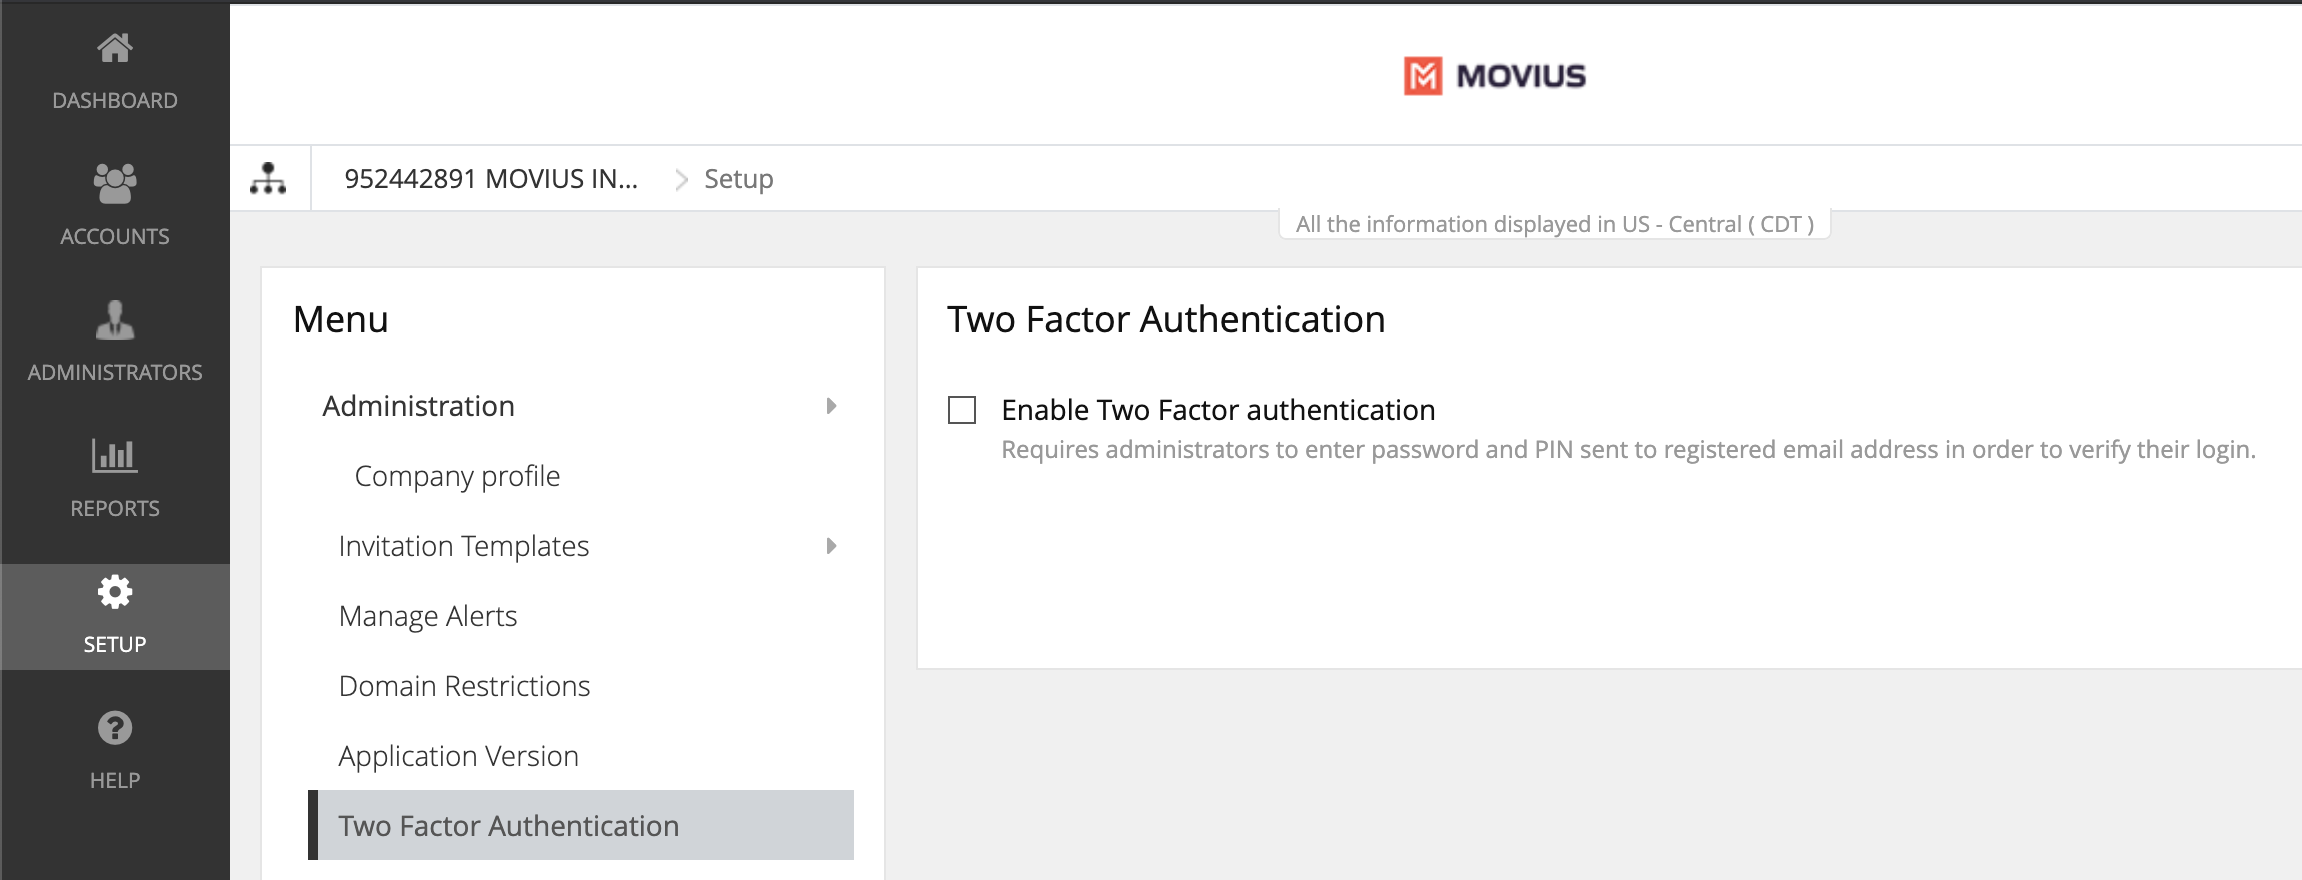 Two Factor Authentication screen